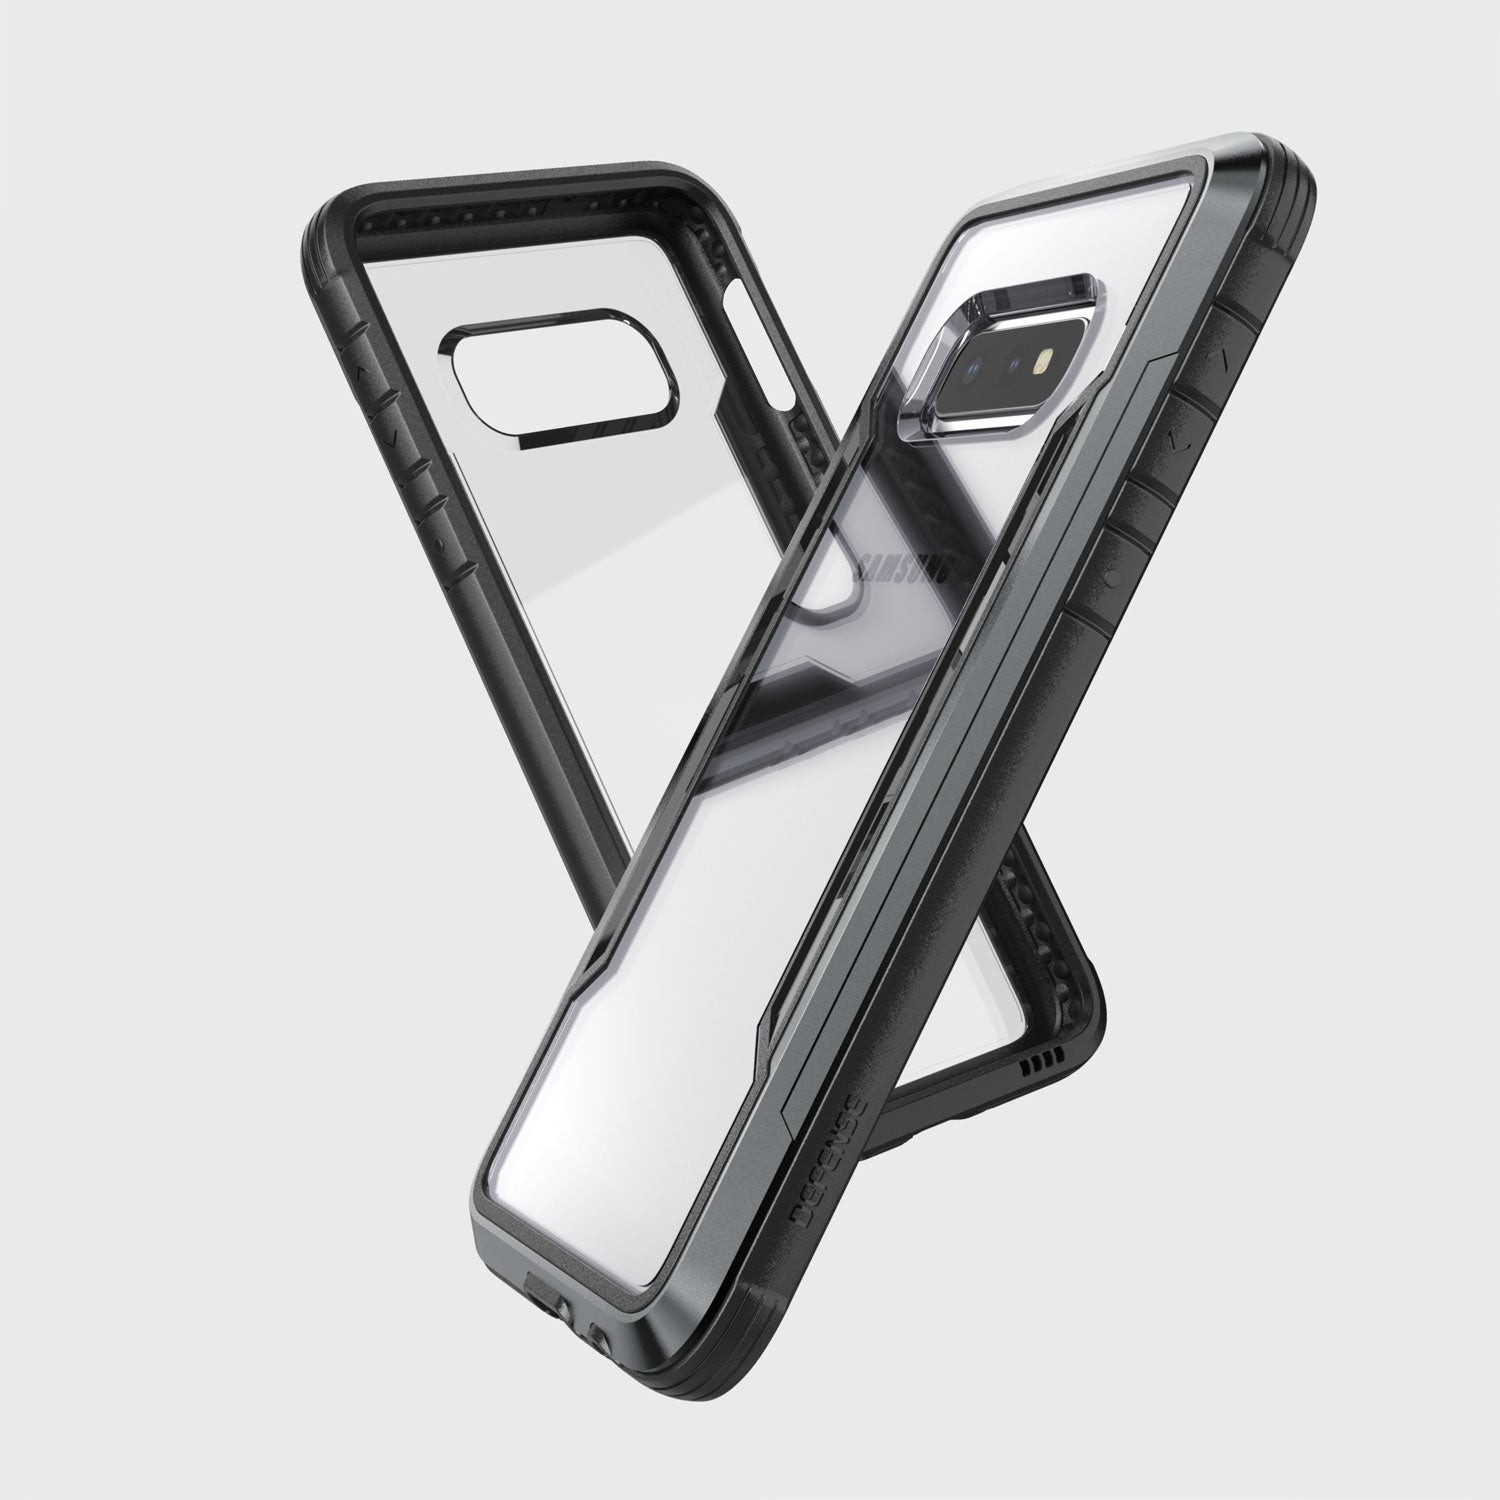 A black Raptic Samsung Galaxy S10e Case with a mirror on the back, providing drop protection and ideal for Galaxy S10e owners.